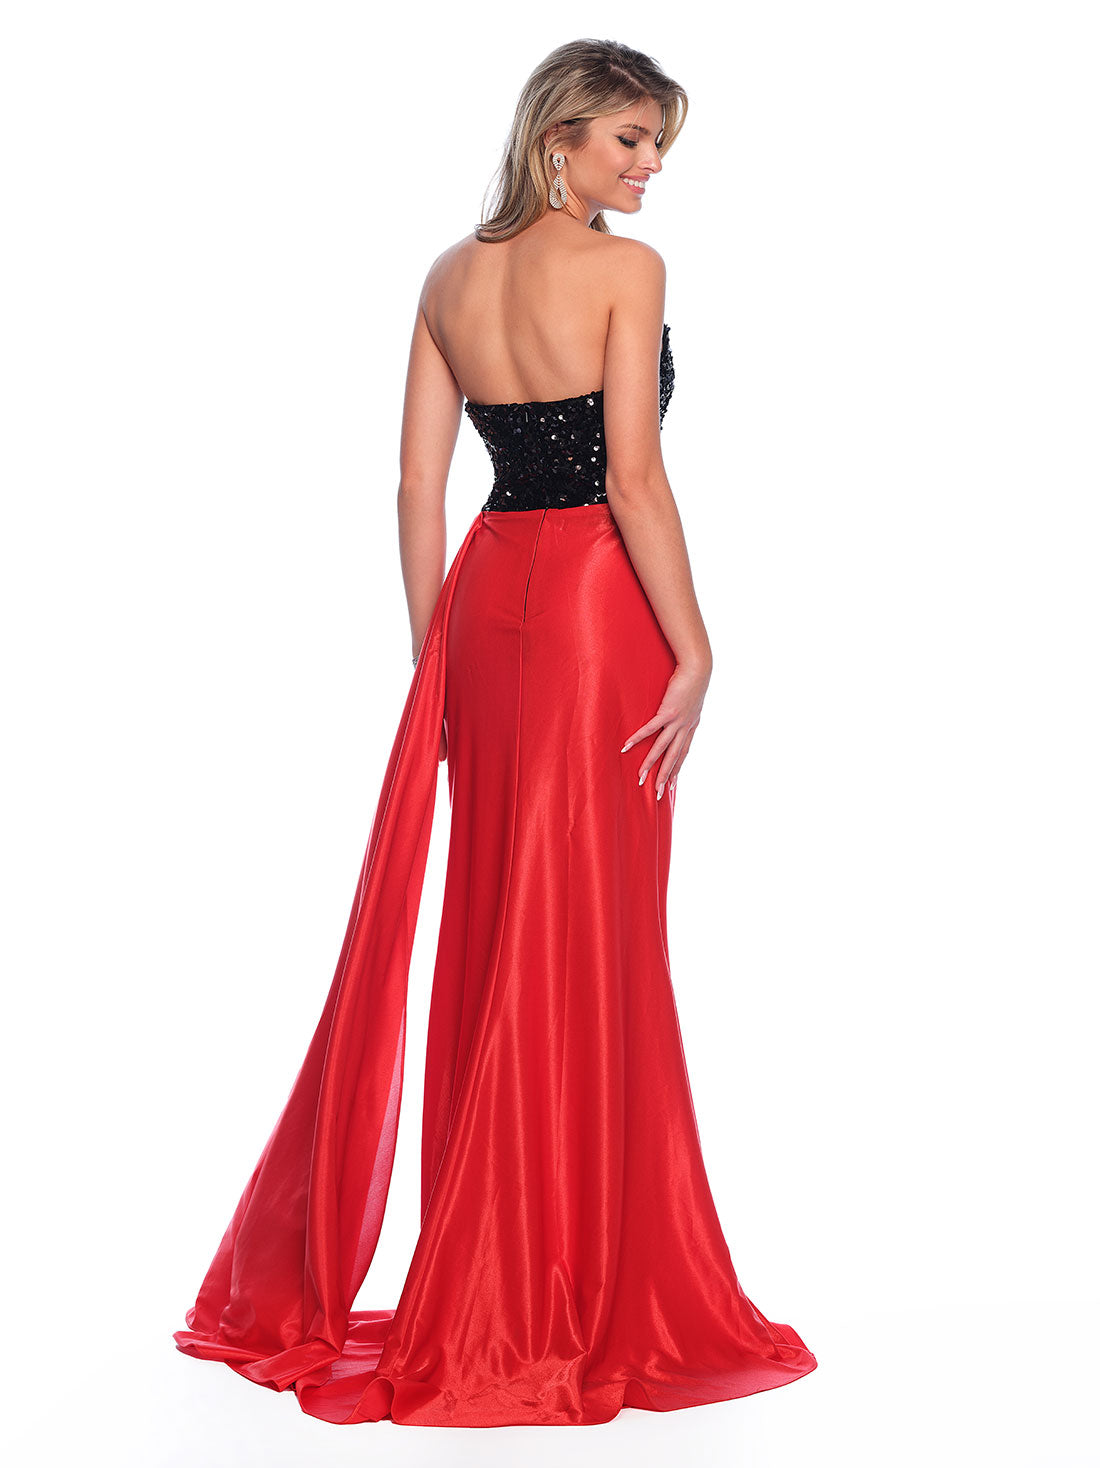 SEQUINS BODICE WITH FITTED SHINY JERSEY SKIRT SIDE SASH